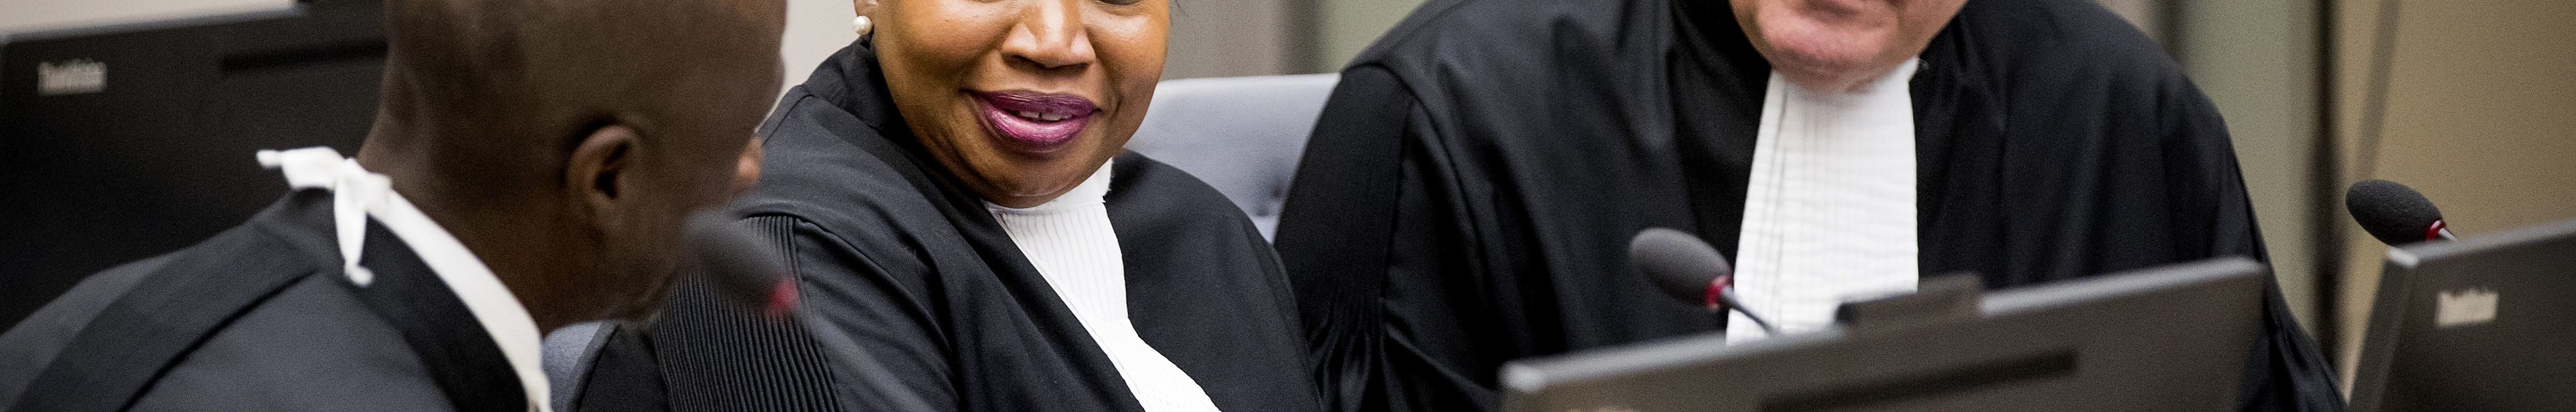 International Criminal Court (ICC) chief prosecutor Fatou Bensouda and deputy prosecutor James Stewart attend the initial appearance before judges of member of the board of the Confederation of African Football (CAF), Patrice-Edouard Ngaissona of the Central African Republic, at the ICC in The Hague on January 25, 2019, following his extradition from France on charges of war crimes and crimes against humanity.